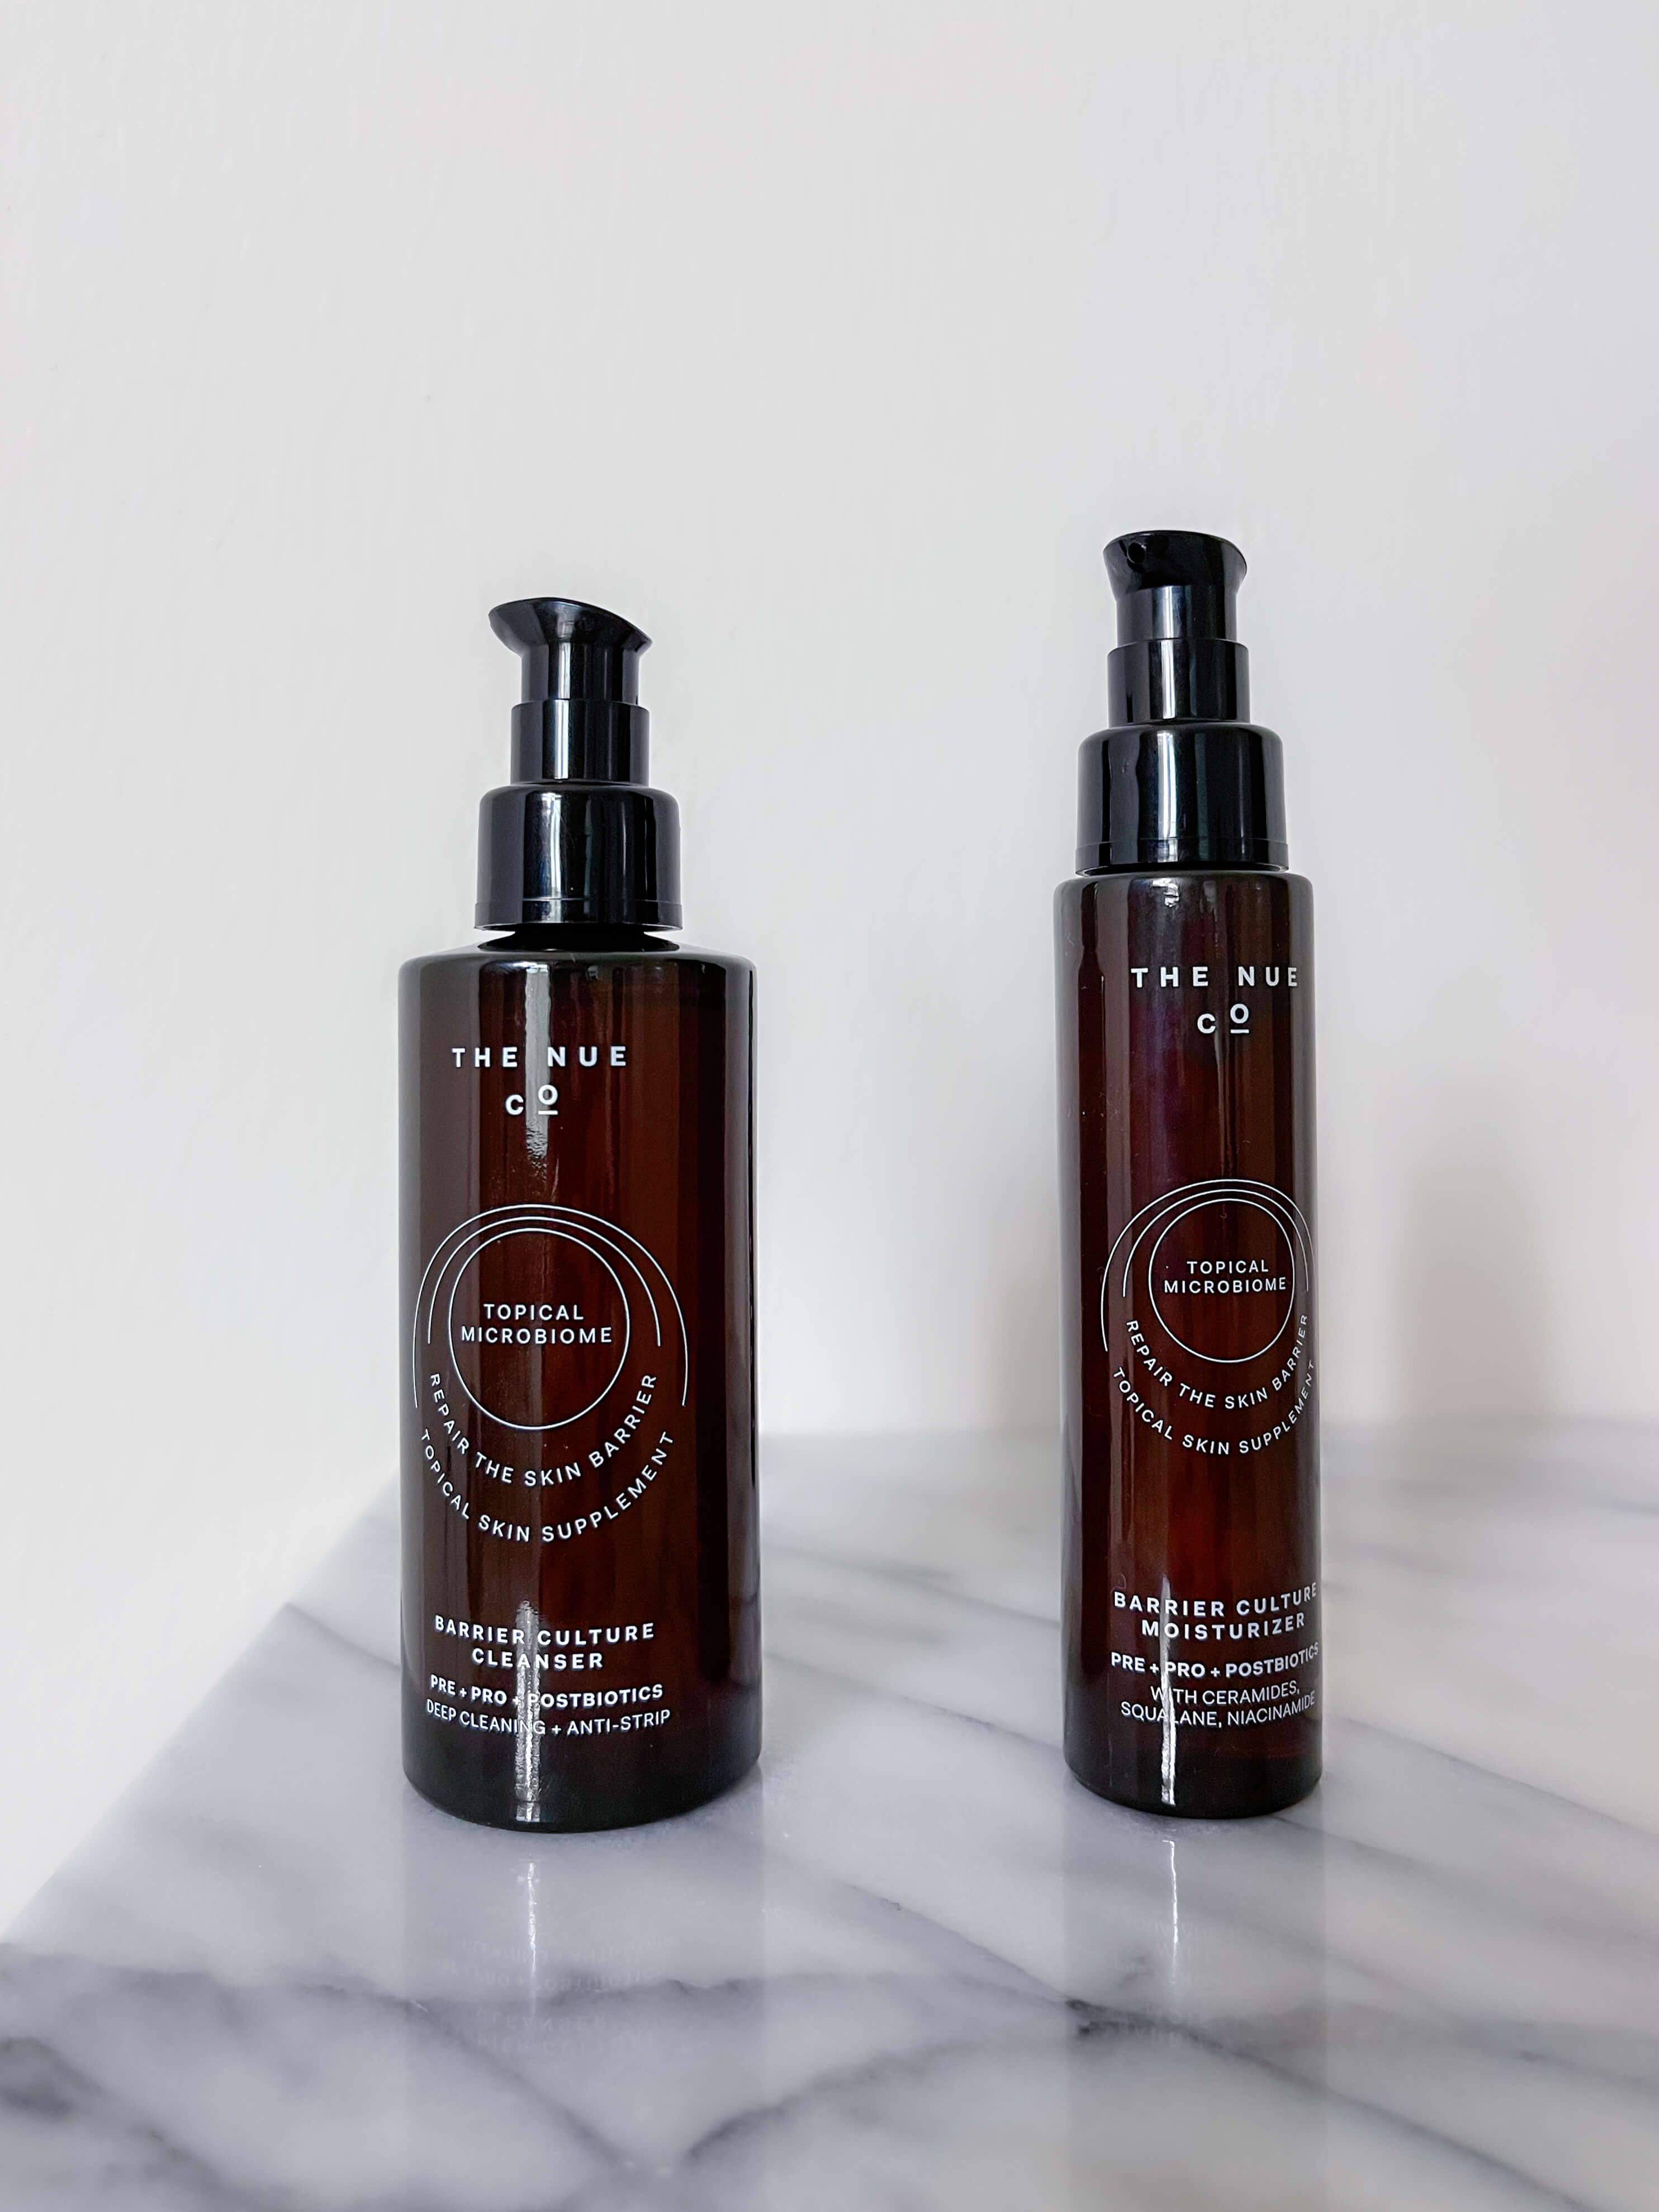 My Review of The Nue Co's Barrier Culture 3-Step Skincare System